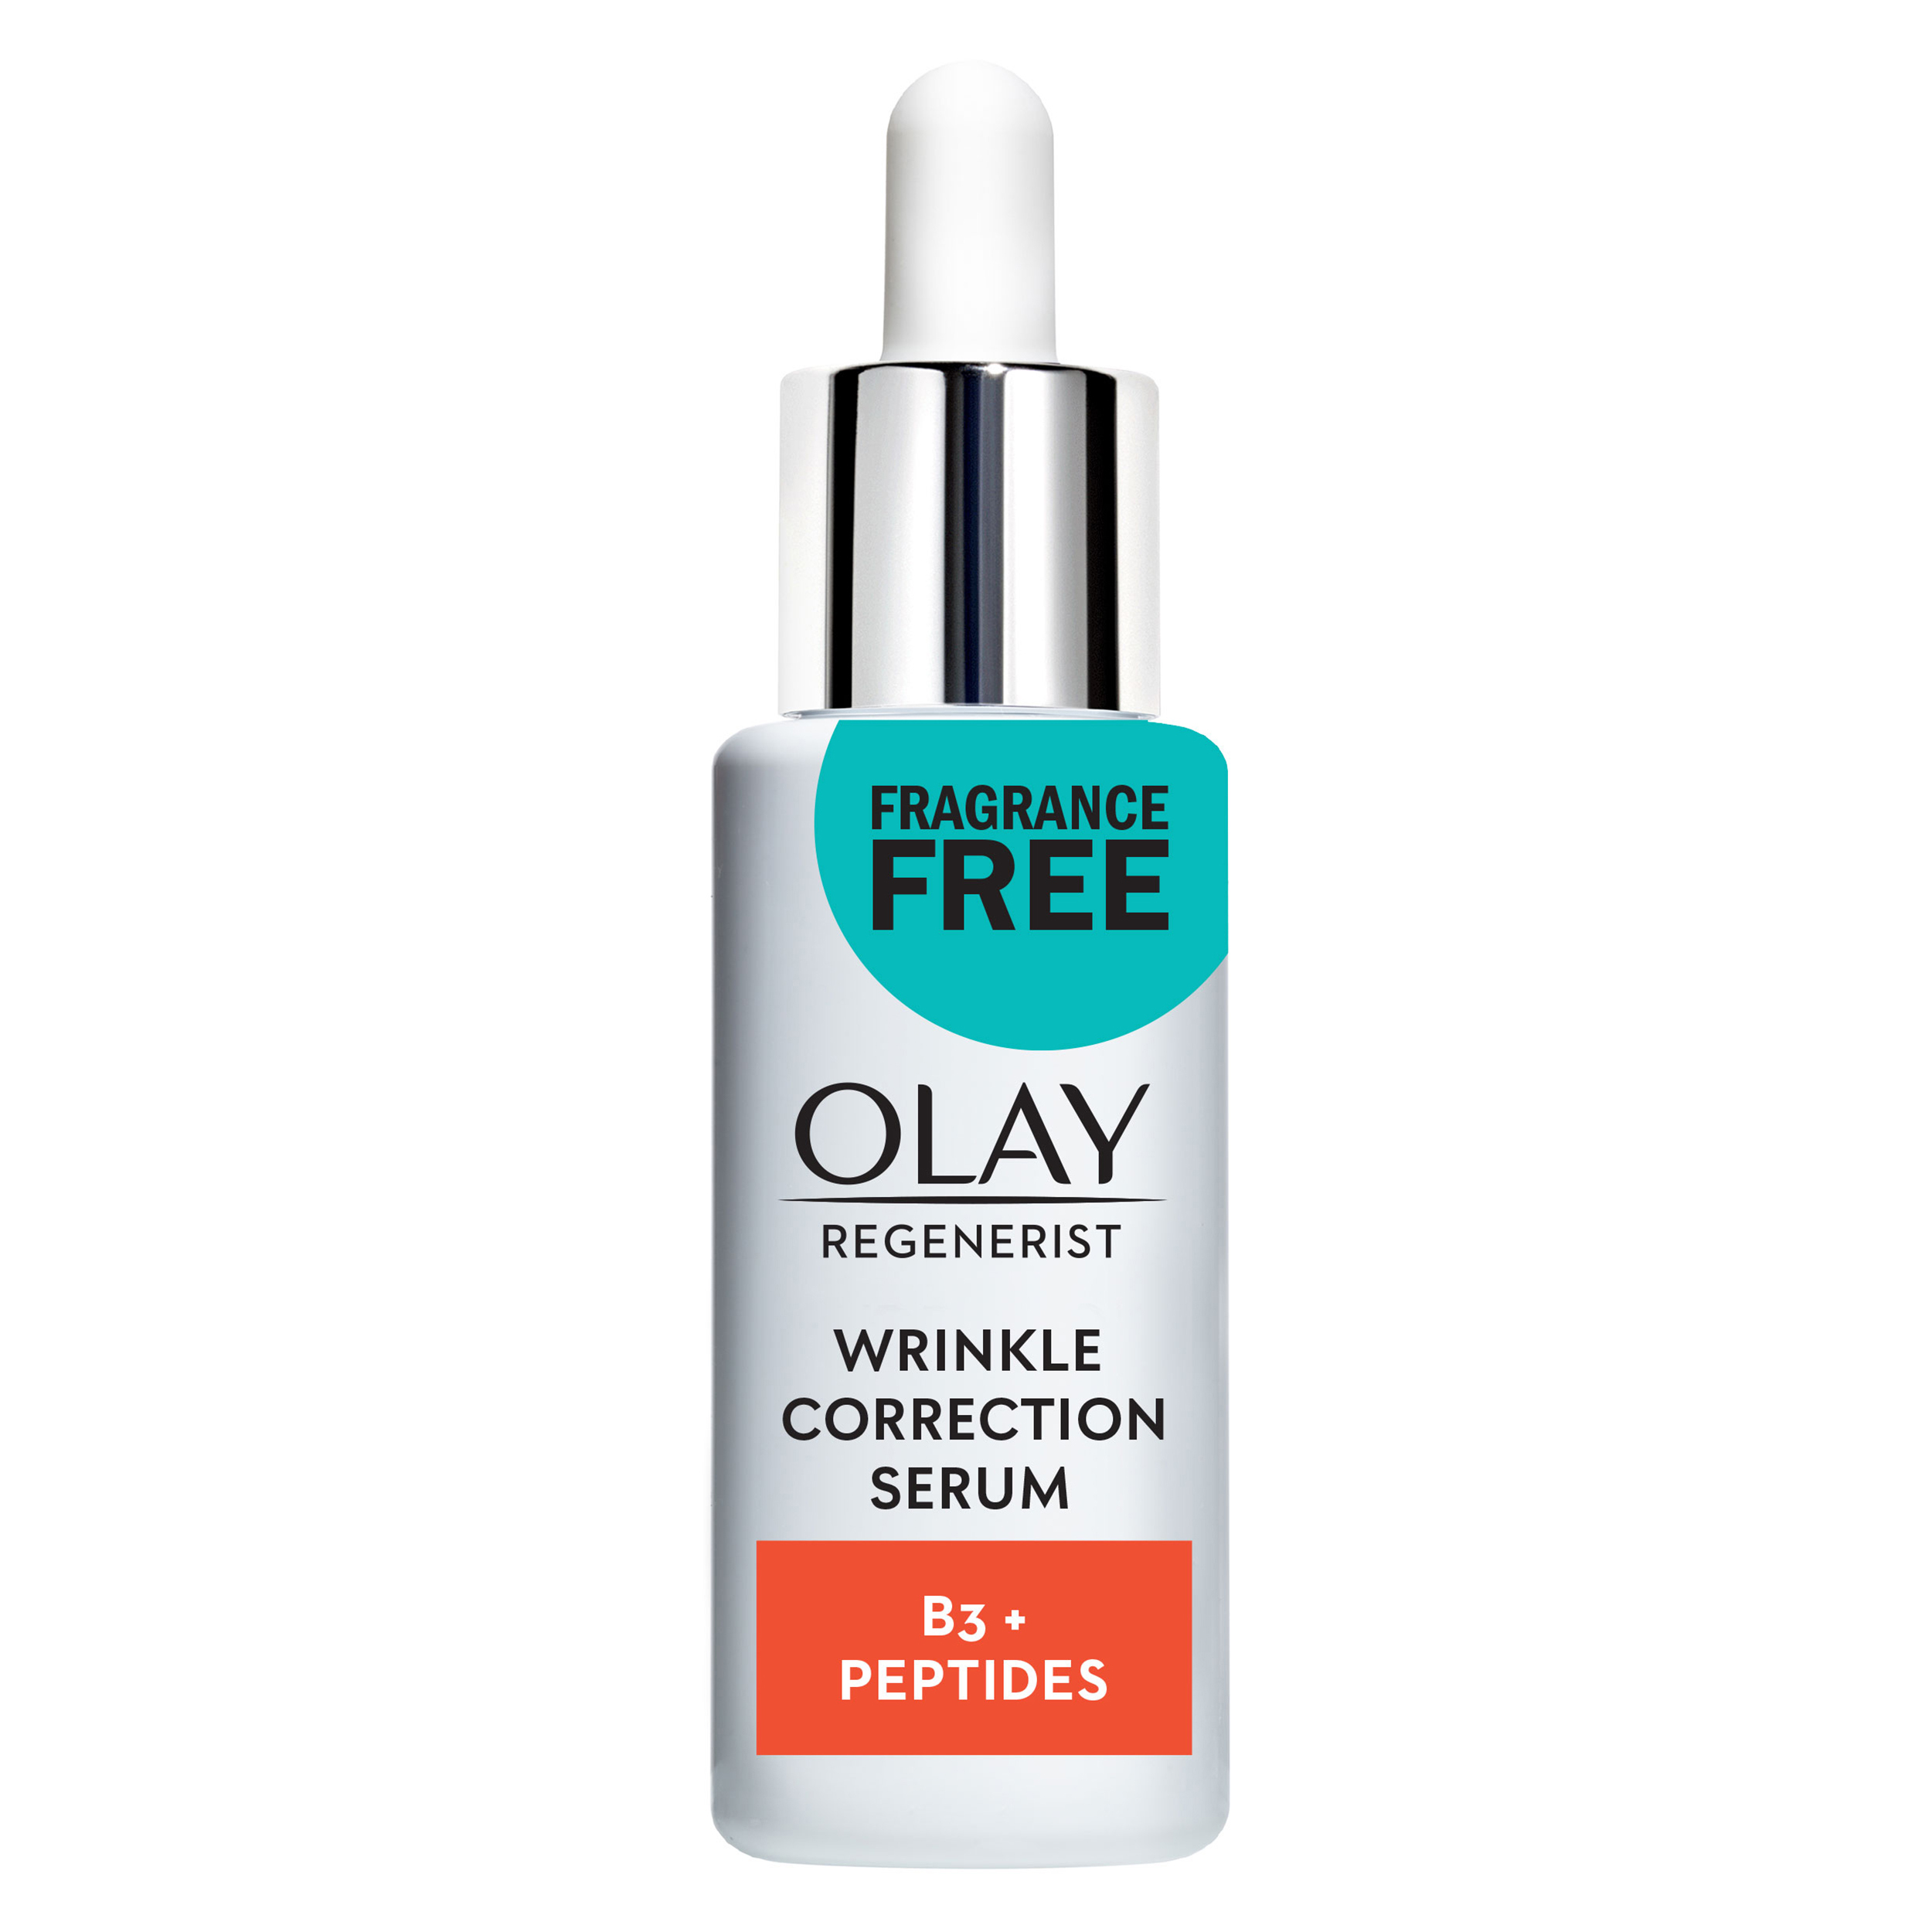 Olay Wrinkle Correction Serum with Vitamin B3+ Collagen Peptides, 1.3 fl oz - image 1 of 14